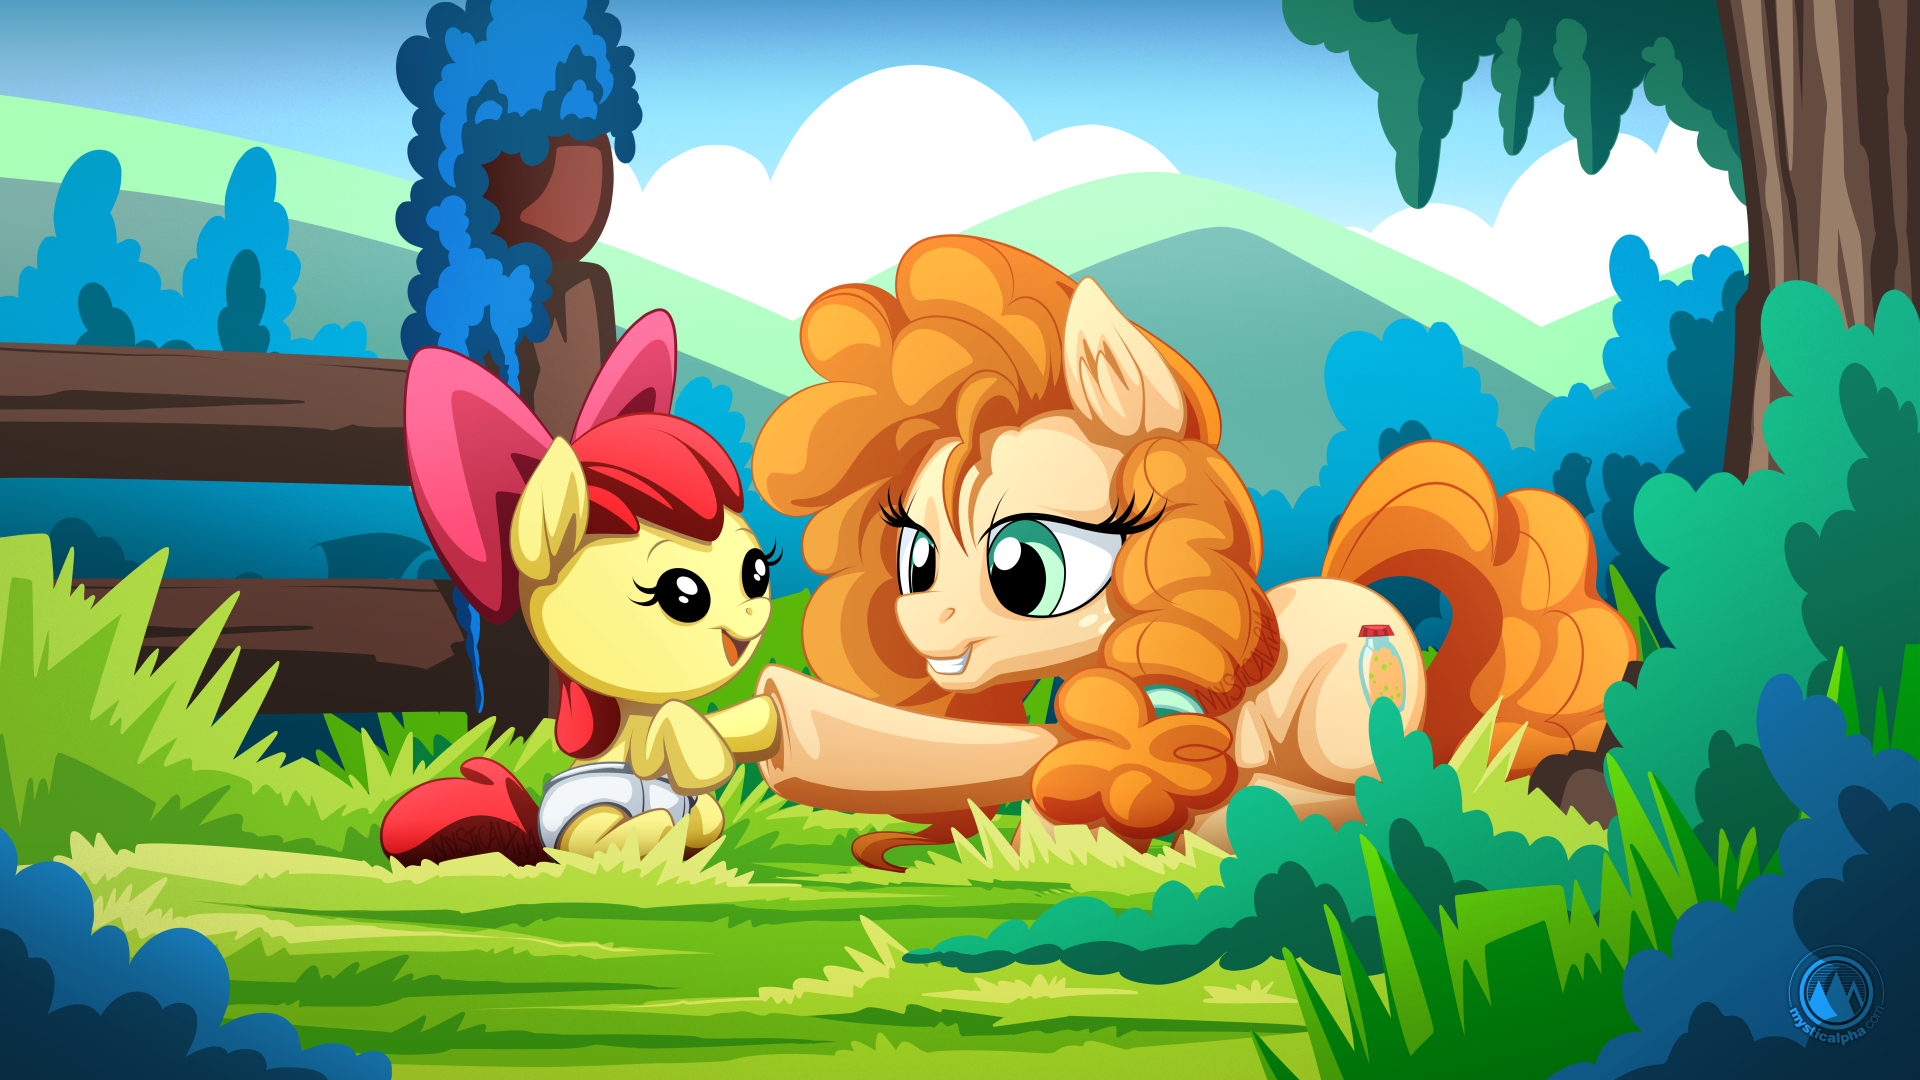 Pear Butter and Apple Bloom